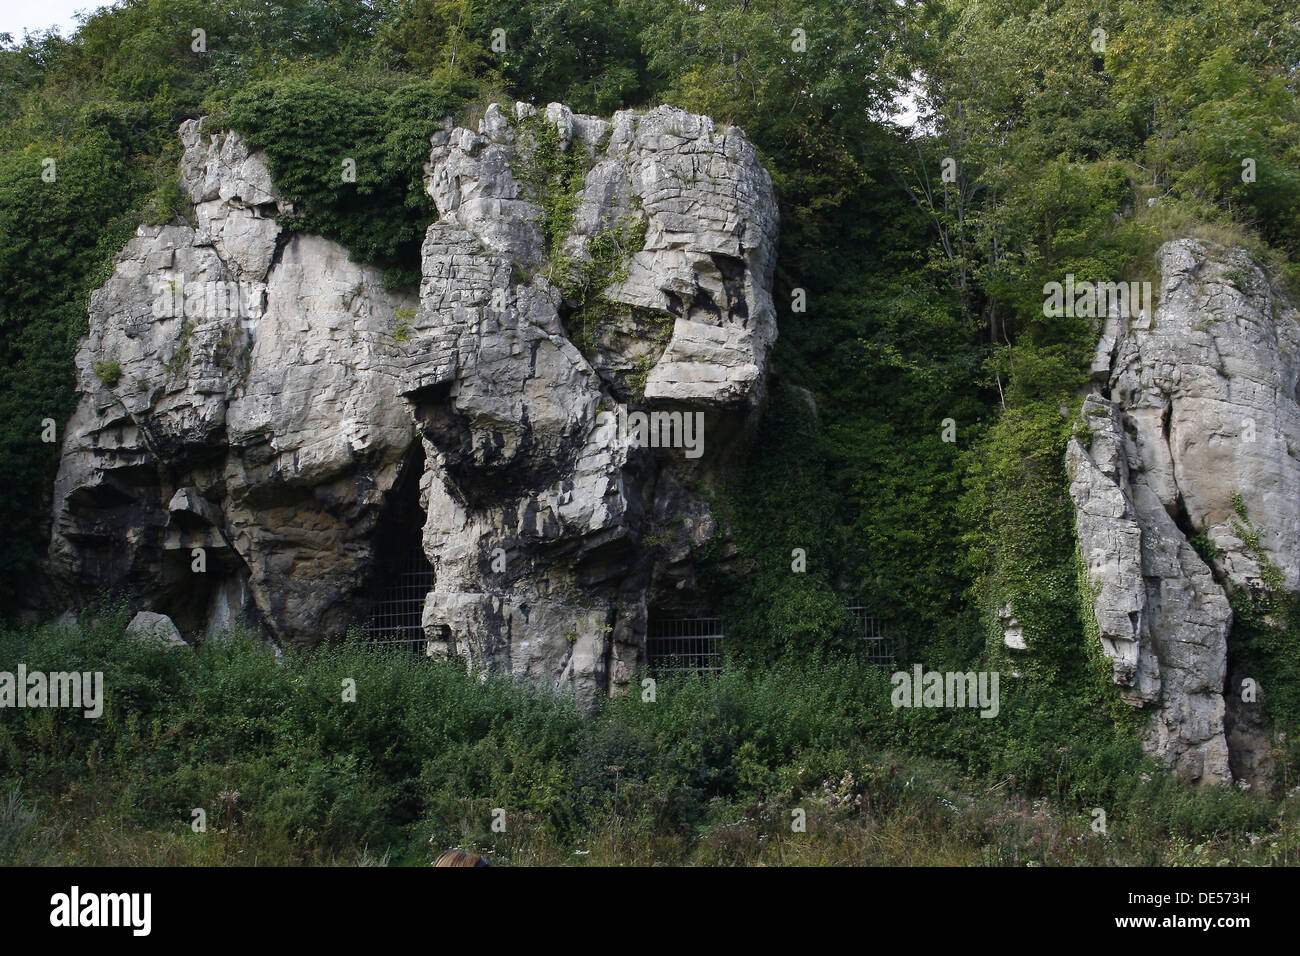 Creswell Crags, Welbeck, Worksop, Nottinghamshire, Regno Unito Foto Stock